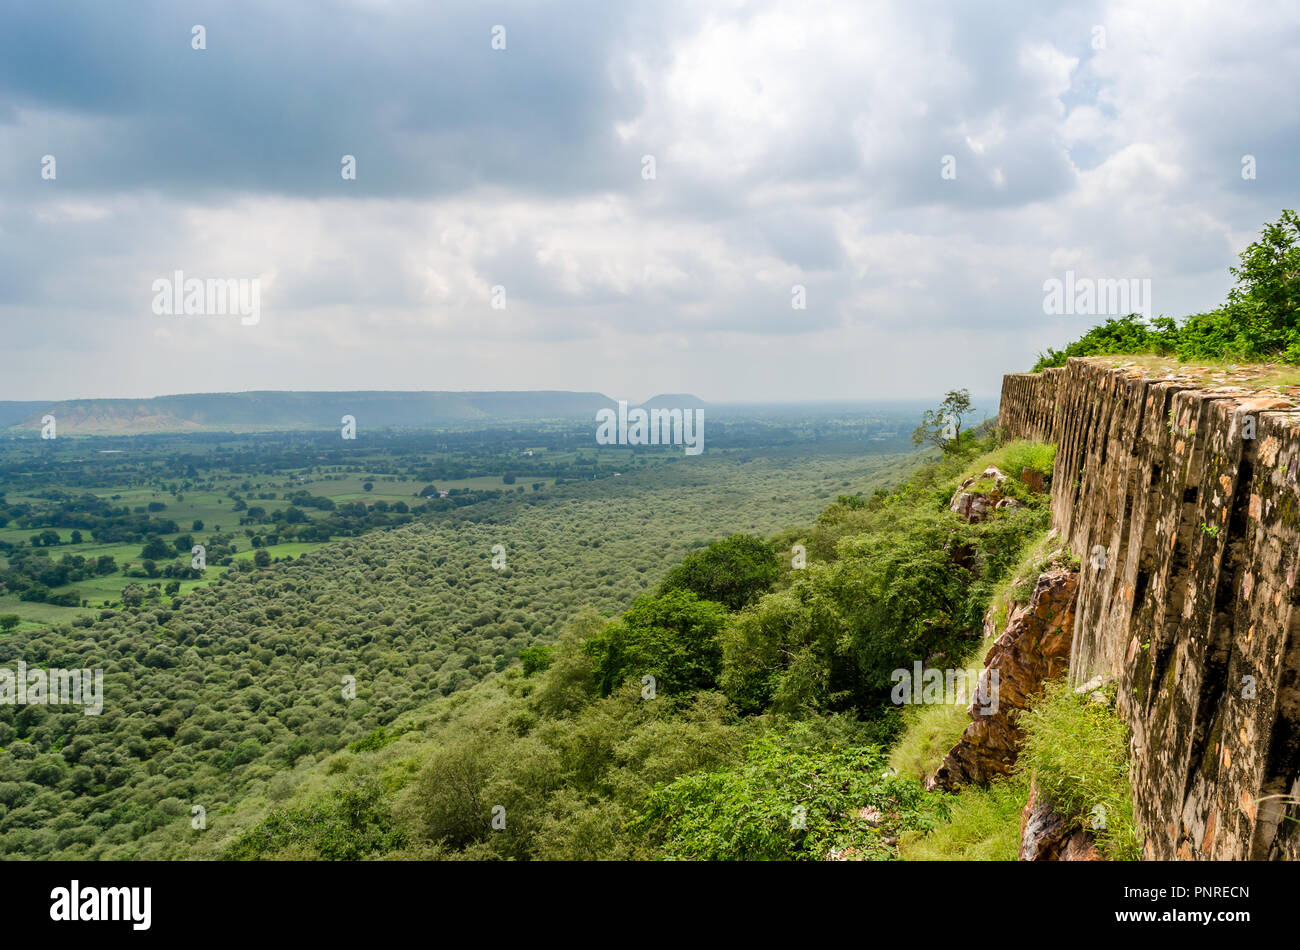 Outside the walls of Chittorgarh fort, Rajasthan, India Stock Photo